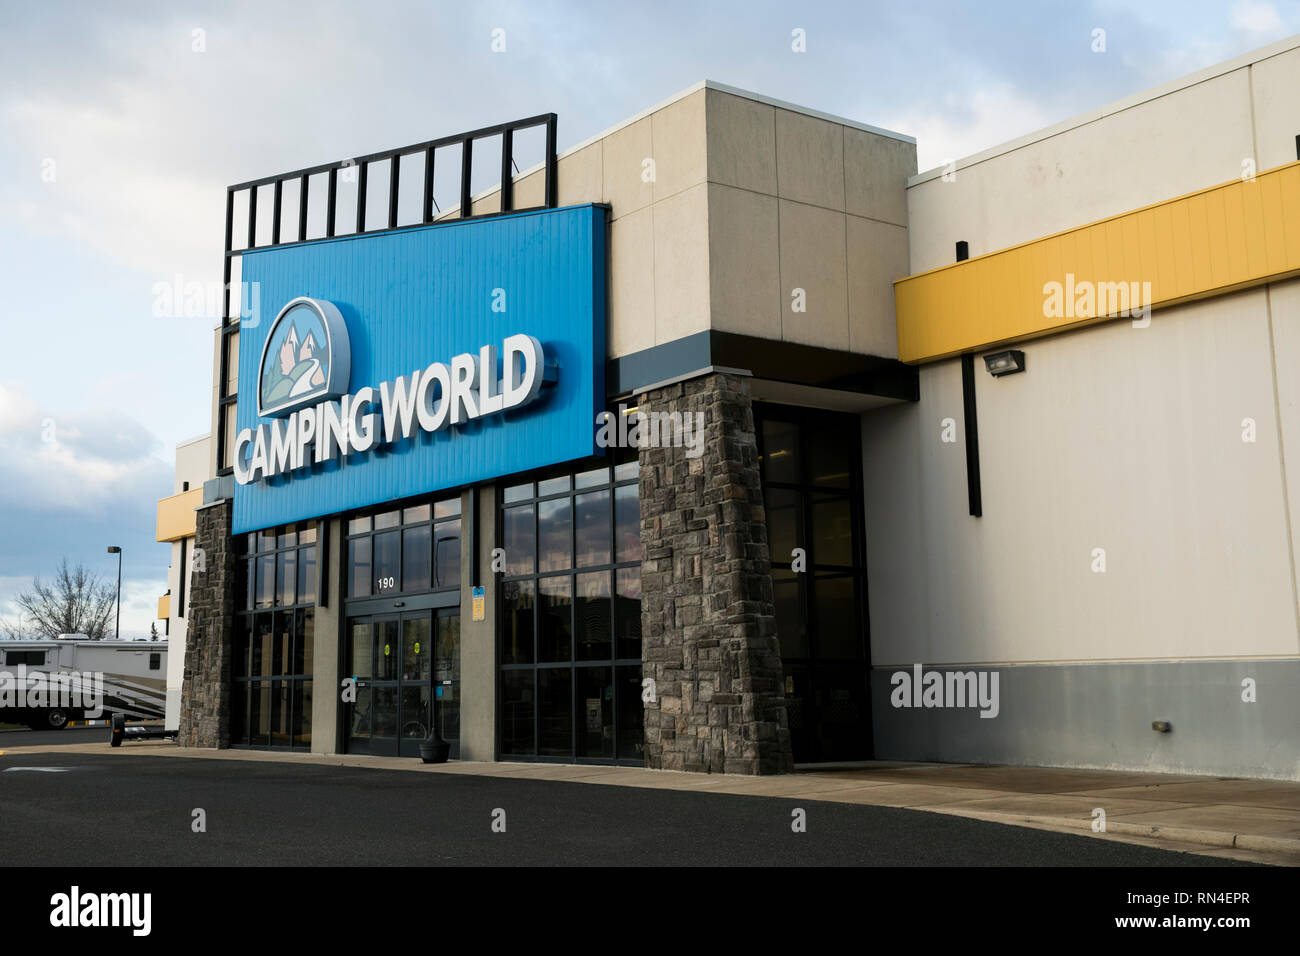 A logo sign outside of a Camping World retail store location in Winchester, Virginia on February 13, 2019. Stock Photo